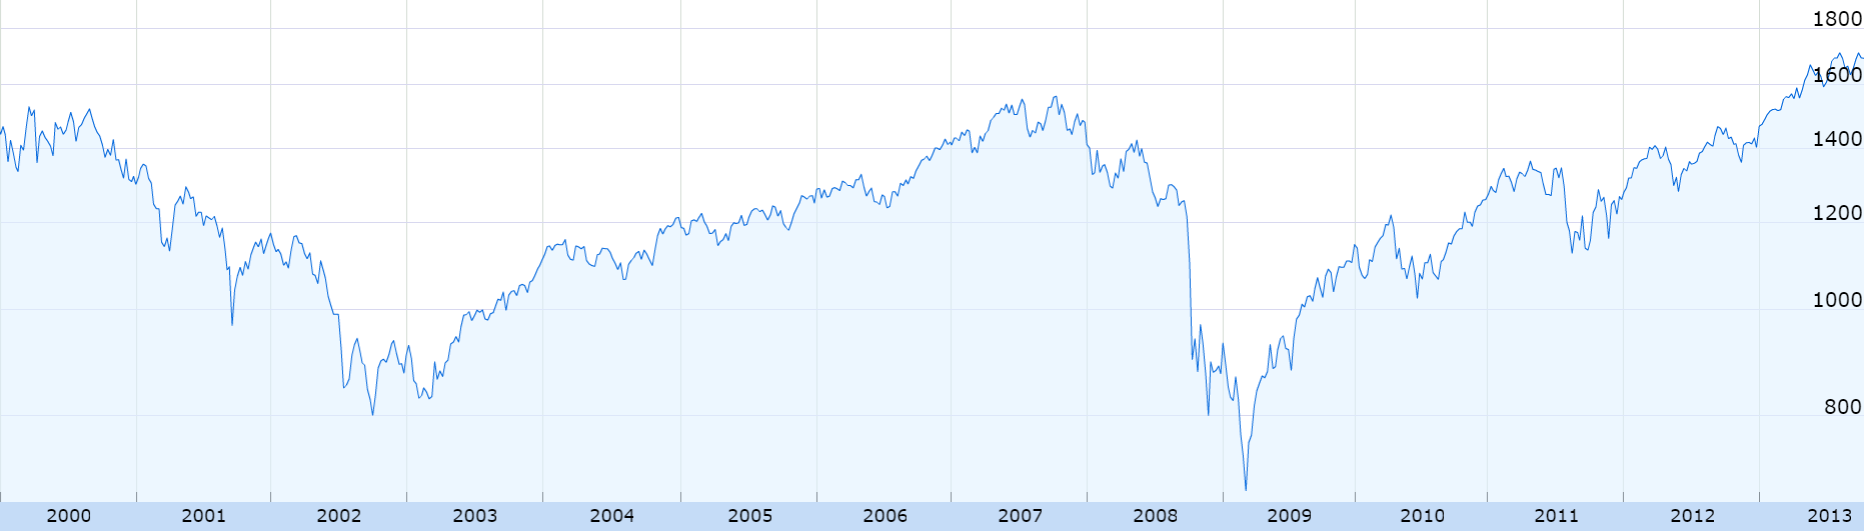 SP500 2001 to 2013